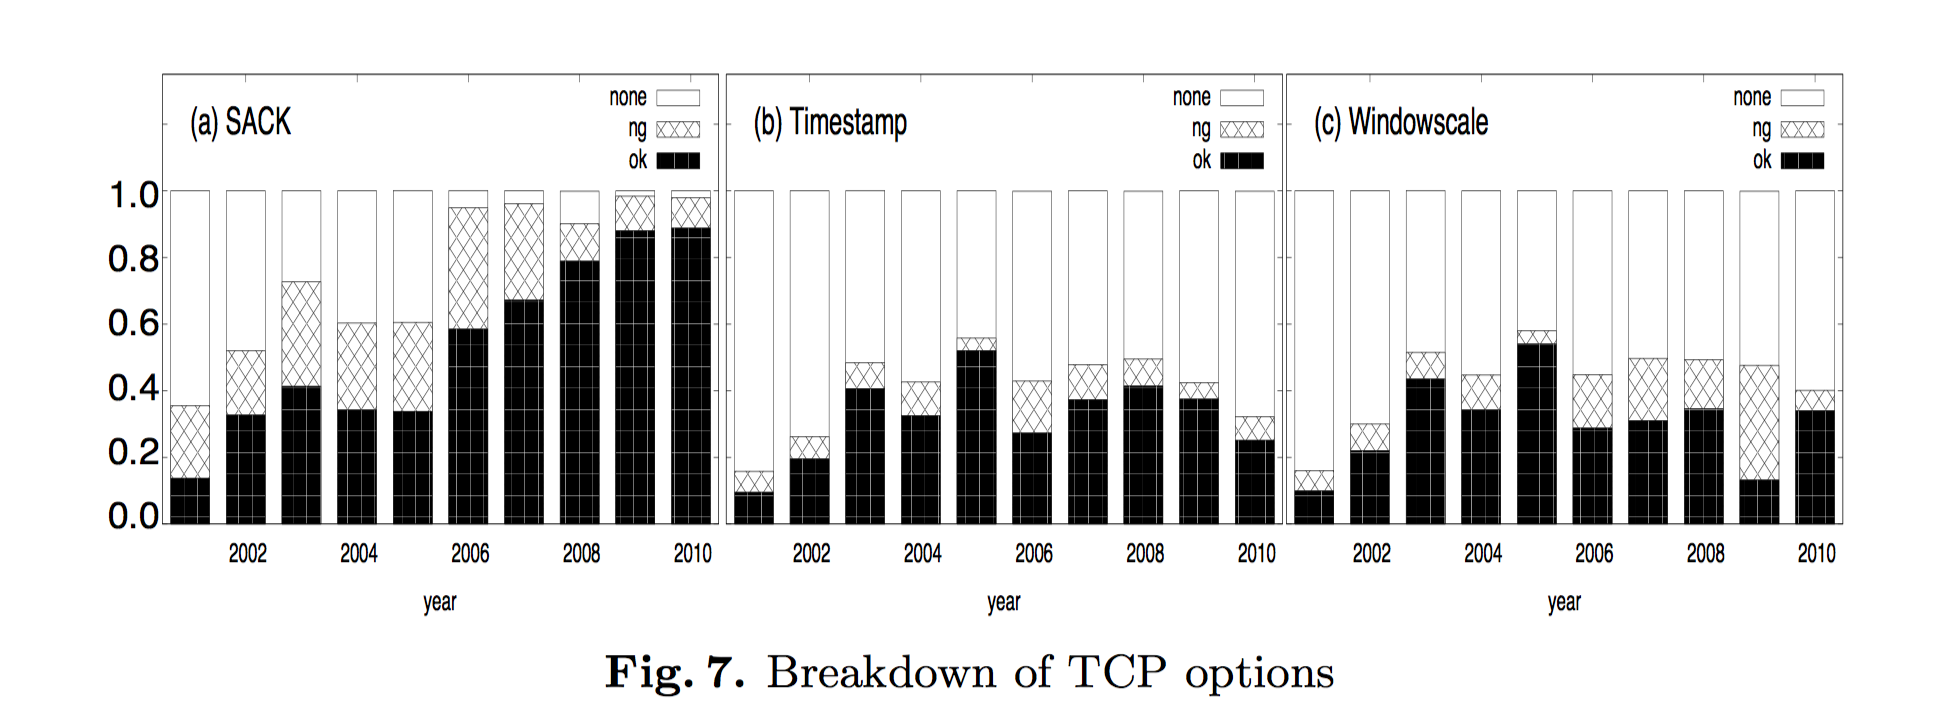 Deployment of TCP options over a decade